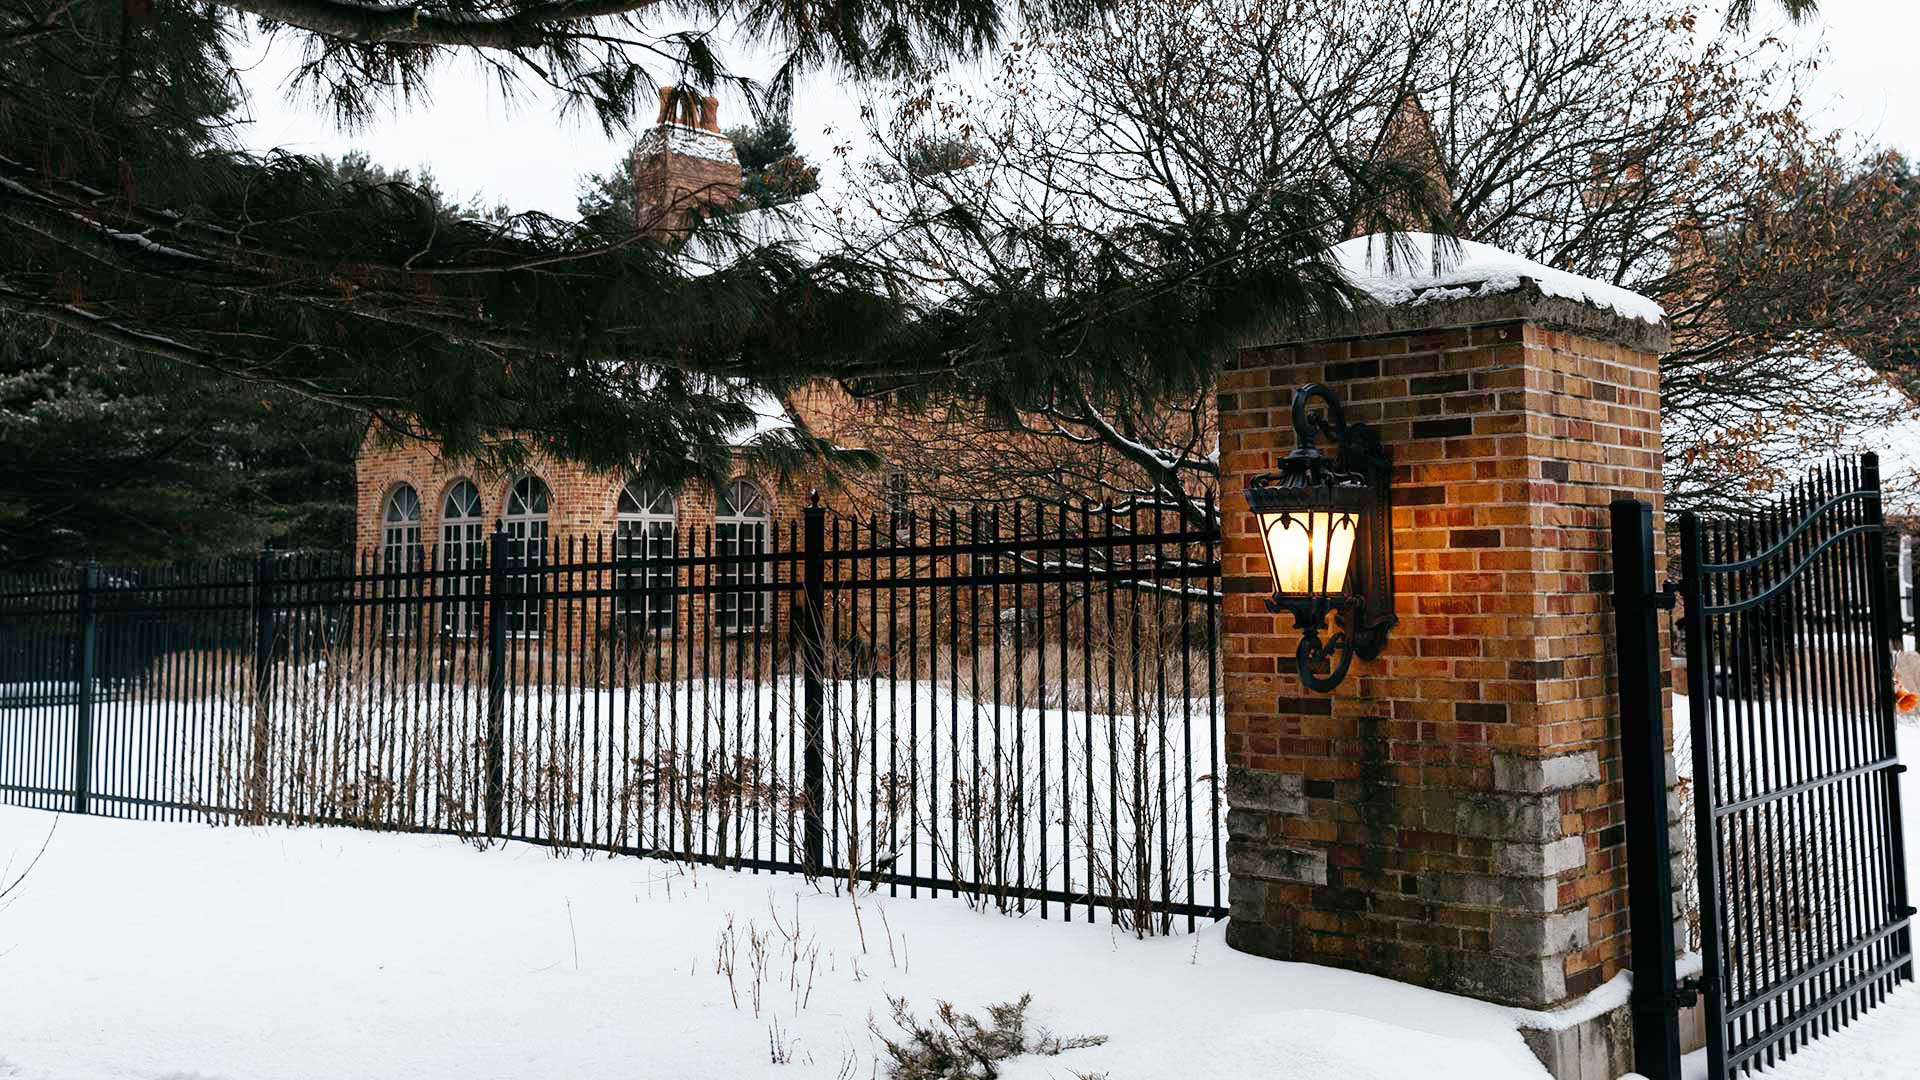 A photo of the front gate of a large brick home with snow on the ground.